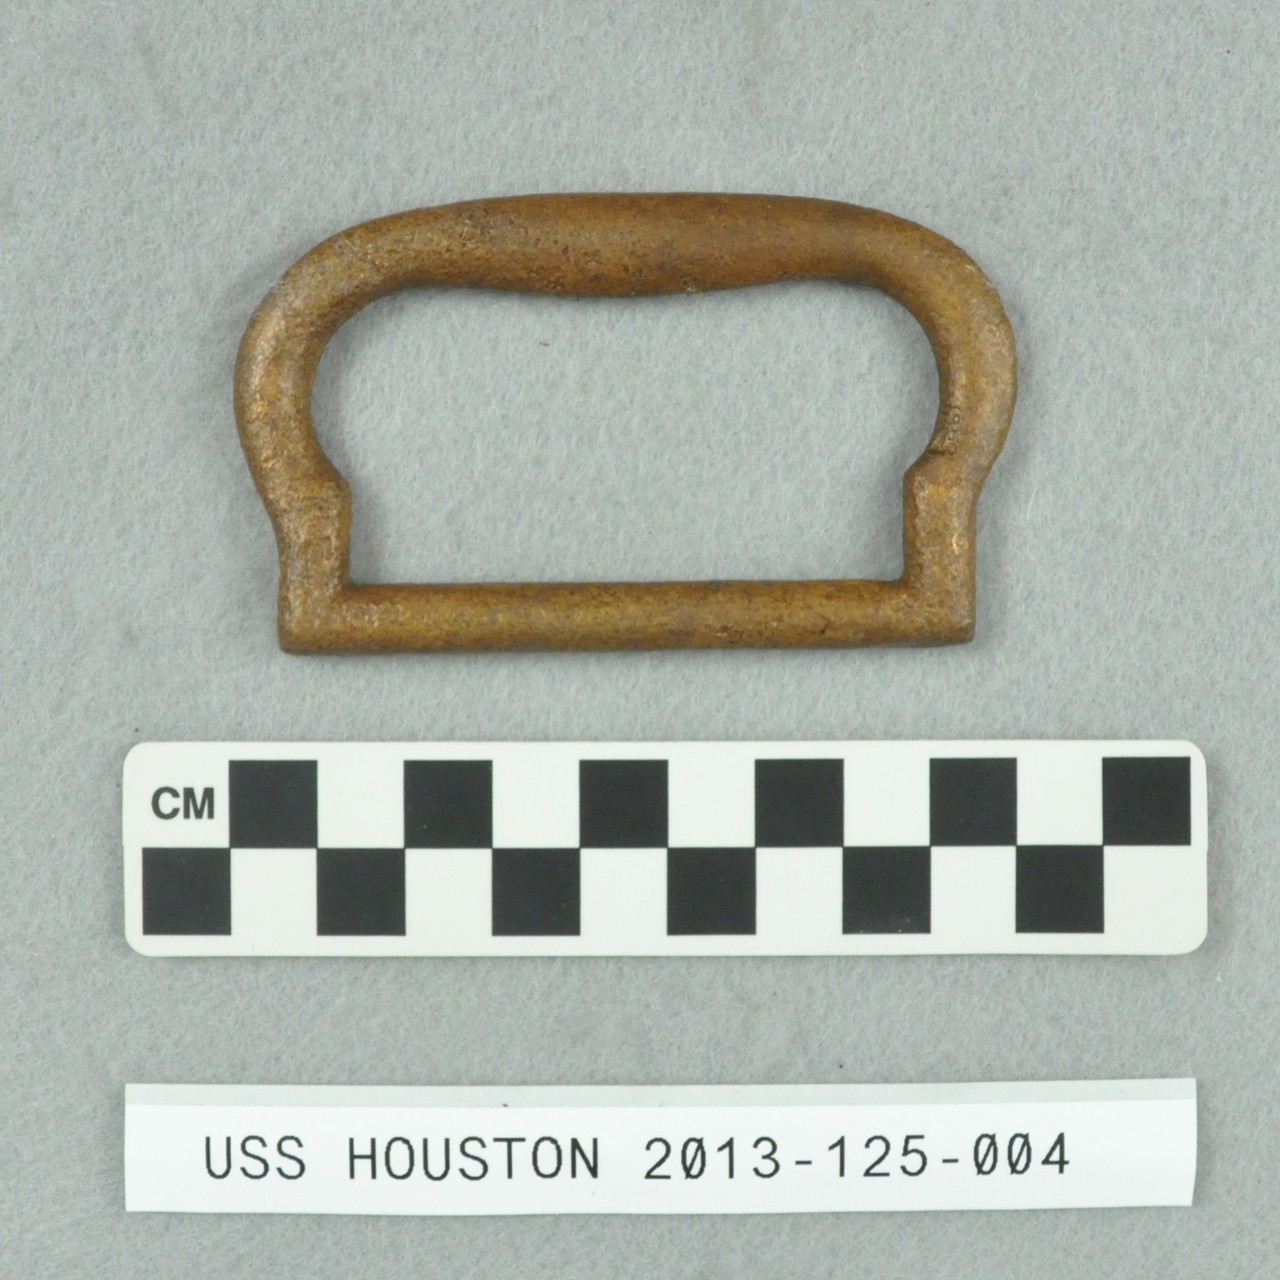 <p>A rectangular shaped brass fitting from USS <i>Houston</i>.</p>
